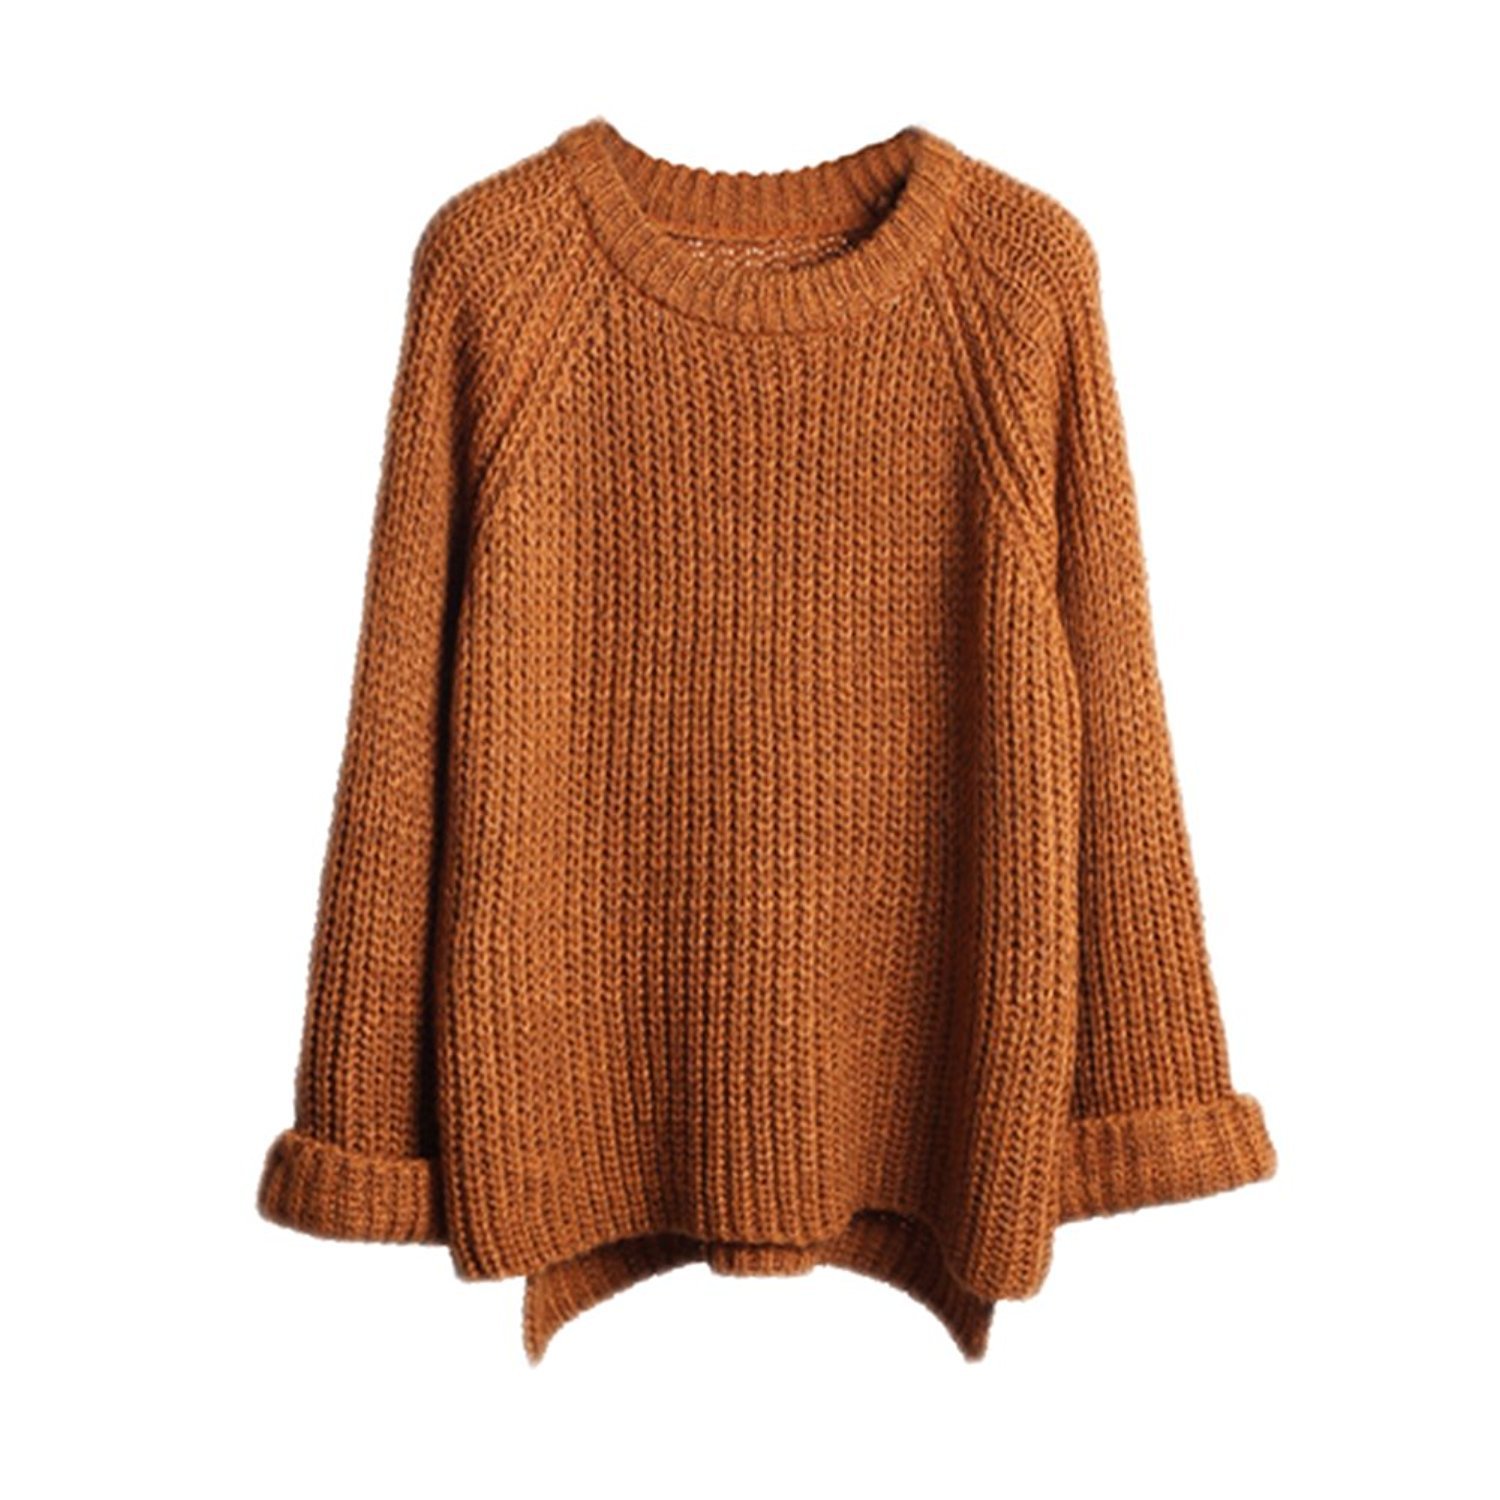 knitted sweaters lisli womenu0027s batwing sleeve loose oversized pullover knitted sweater  (coffee) at amazon ydhyfai